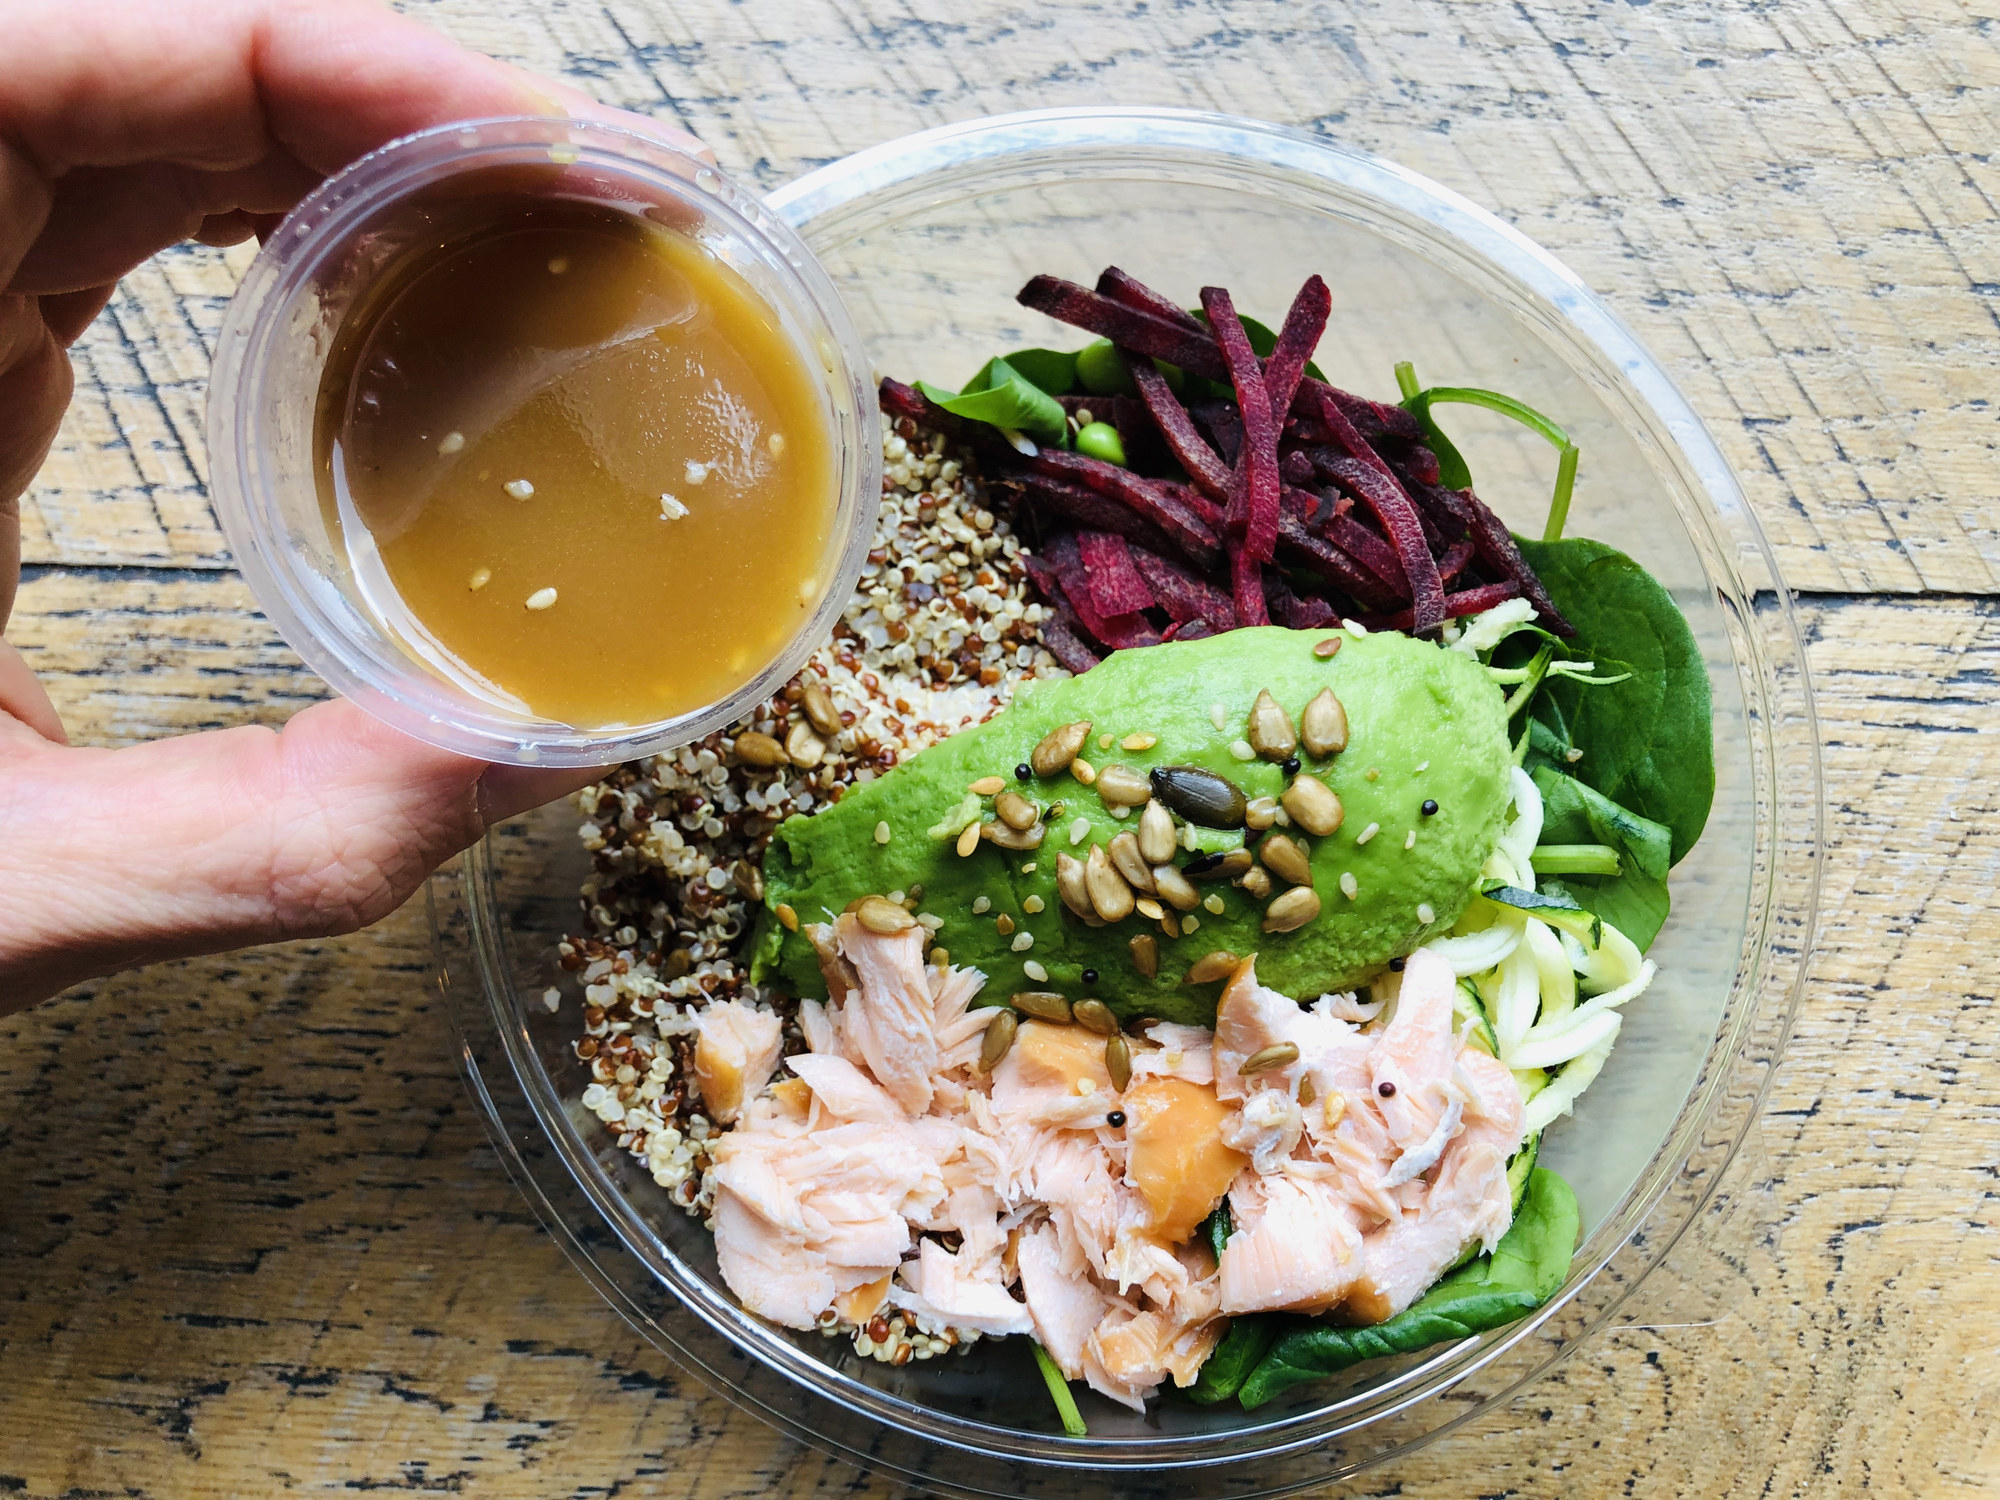 A salmon, avocado, and quinoa salad in a takeout bowl